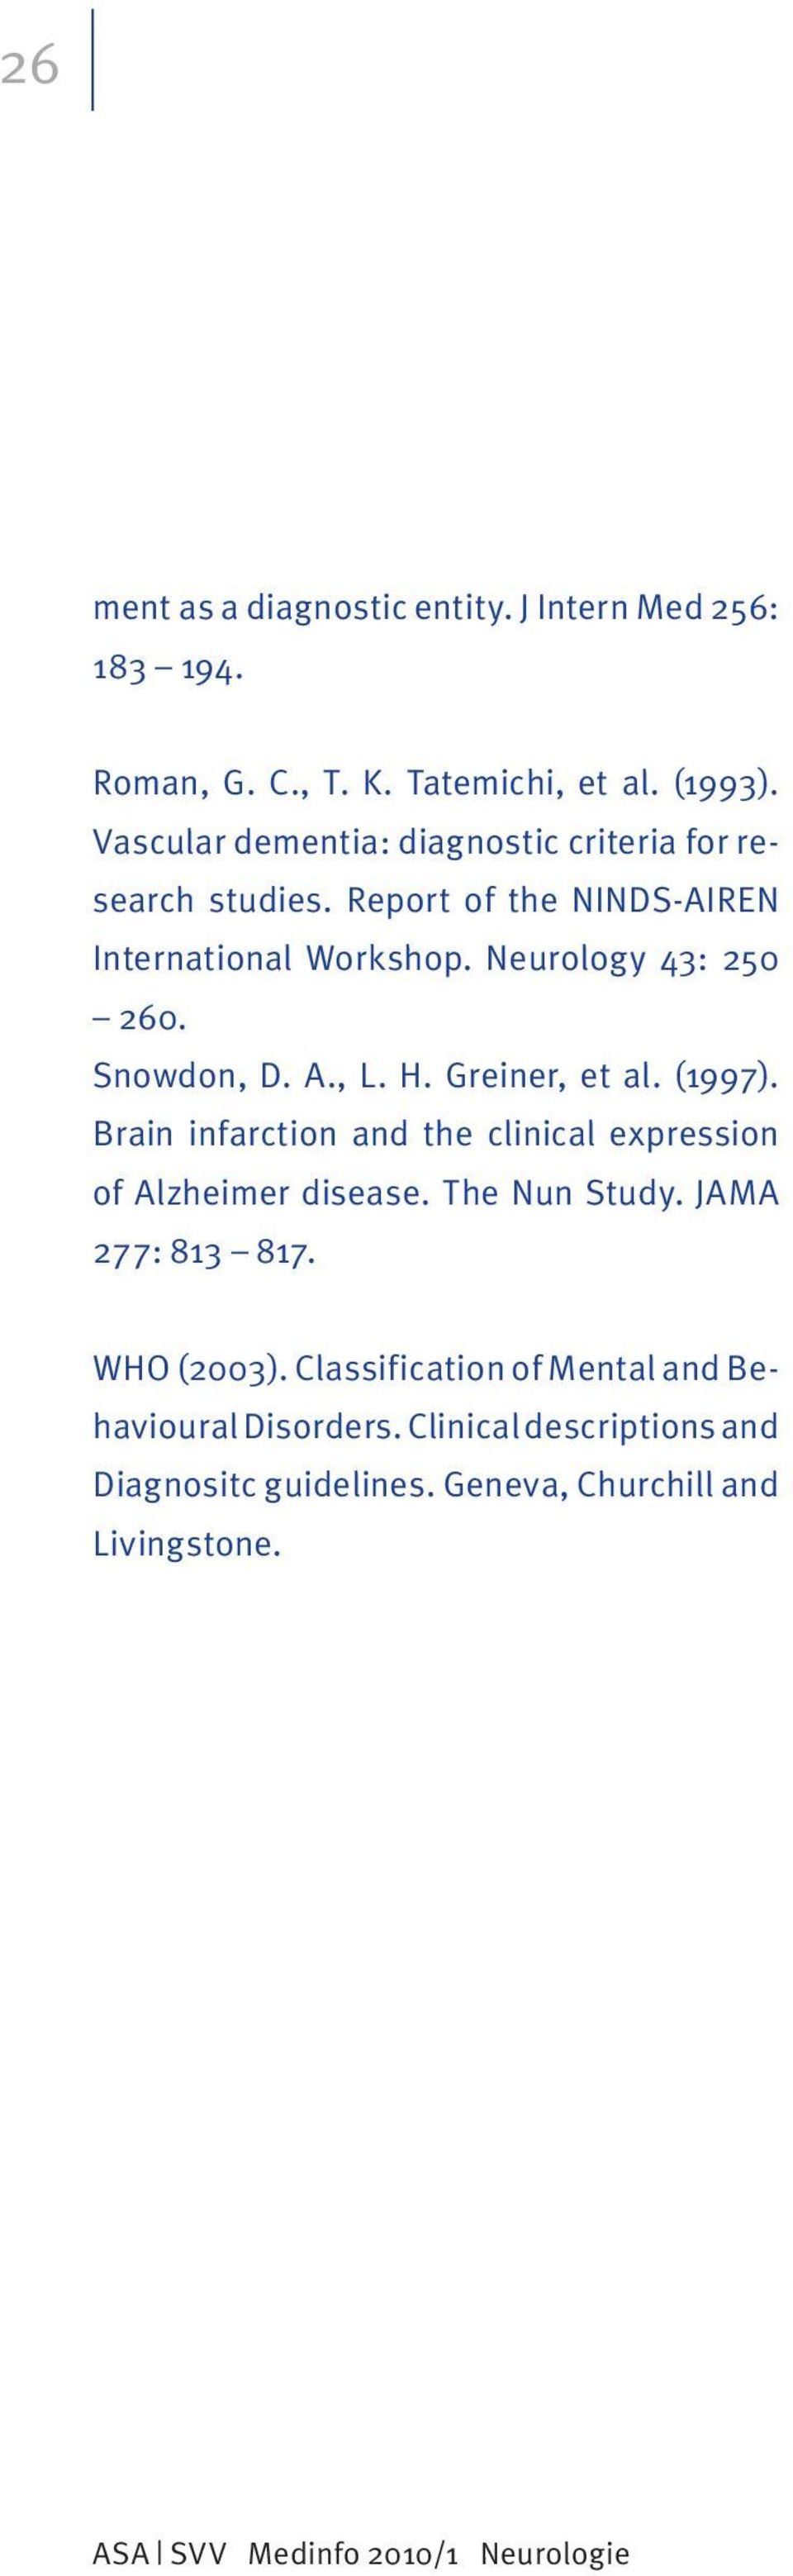 Snowdon, D. A., L. H. Greiner, et al. (1997). Brain infarction and the clinical expression of Alzheimer disease. The Nun Study.